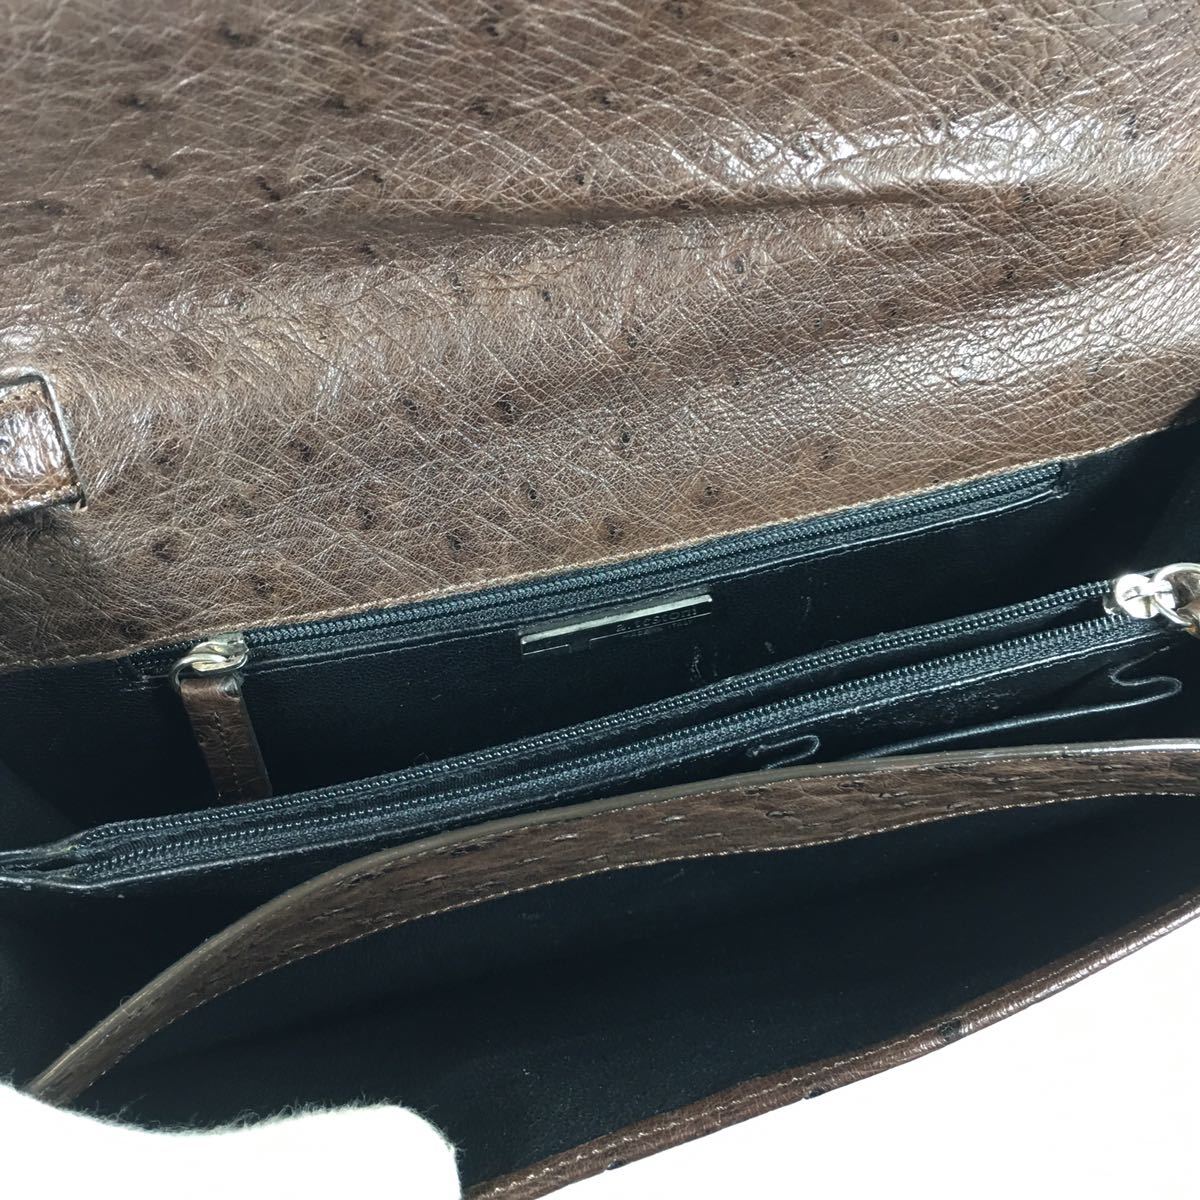 [a* test -ni] genuine article a.testoni Ostrich tea second bag hand strap clutch bag . bird men's Italy made postage 520 jpy 